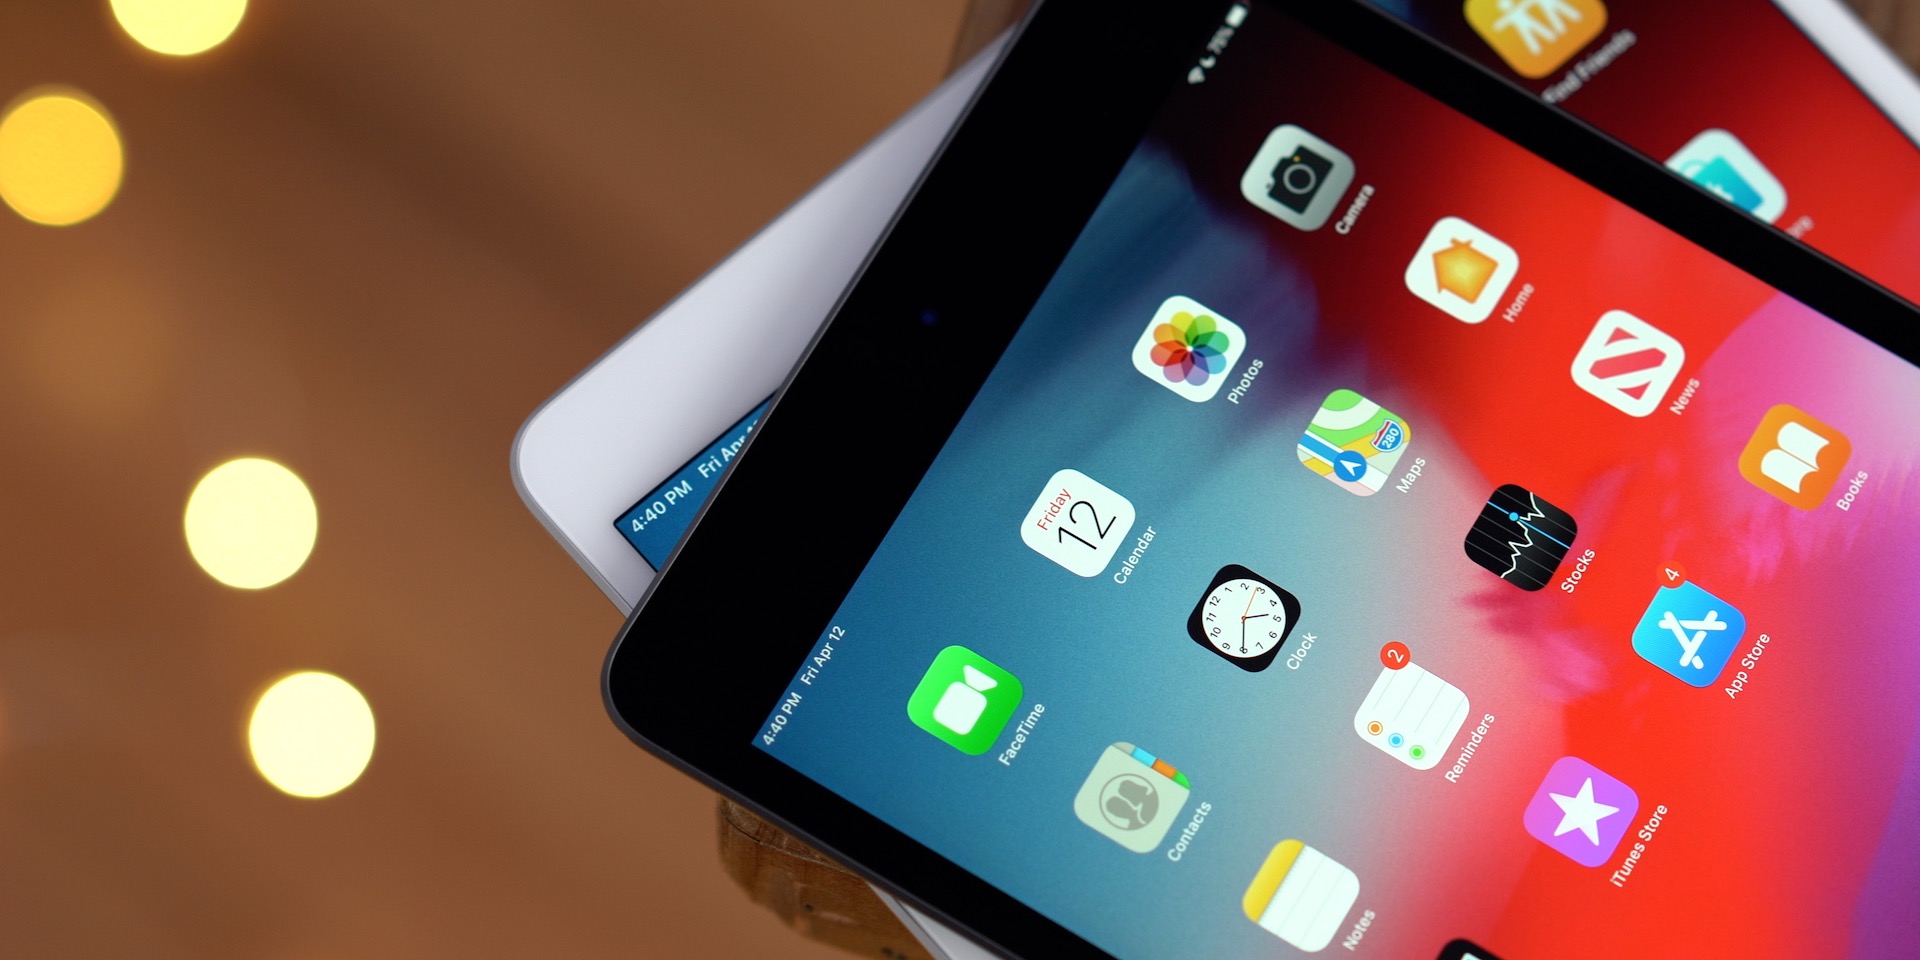 Apple iPad Mini 5 - 2019 Reviews, Pros and Cons